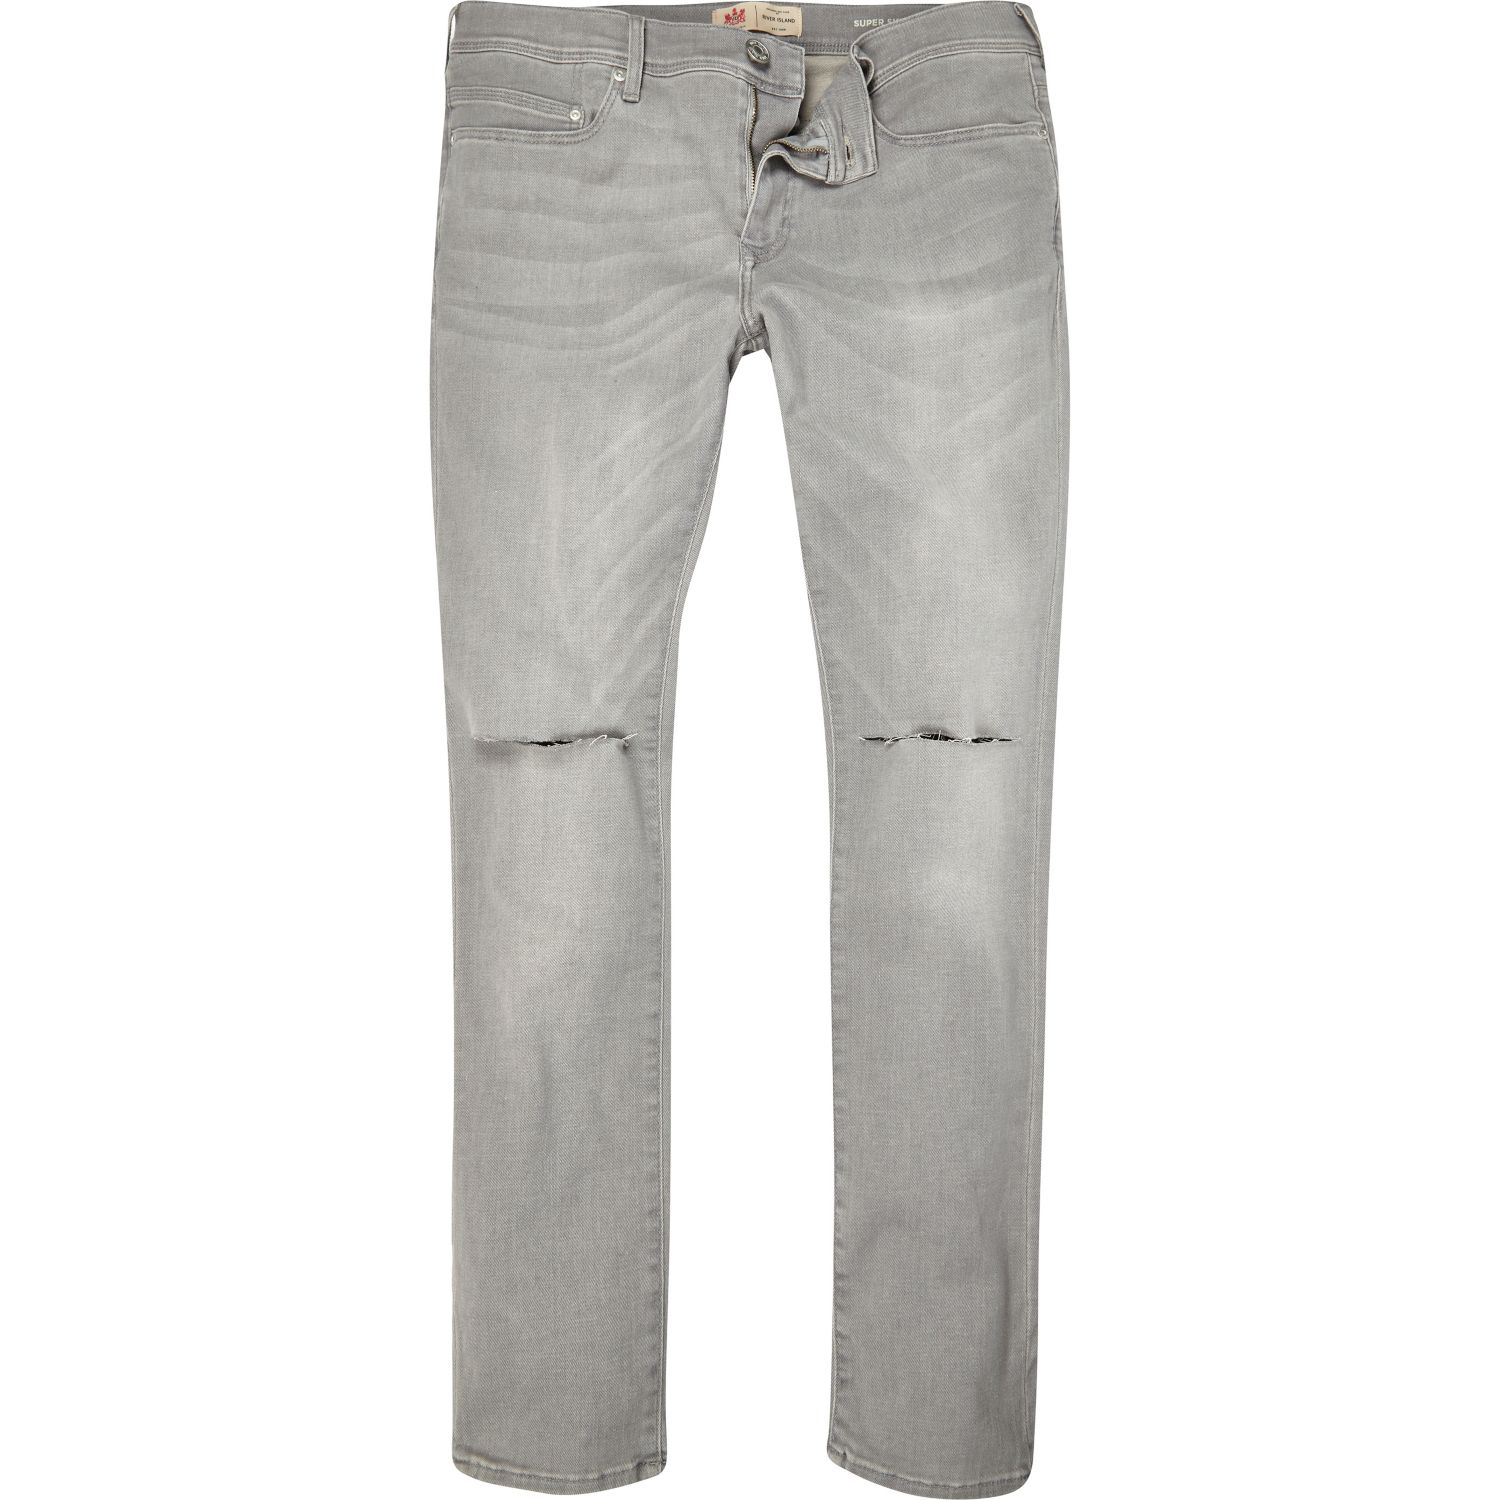 River Island Grey Ripped Danny Superskinny Jeans in Gray for Men (Grey ...